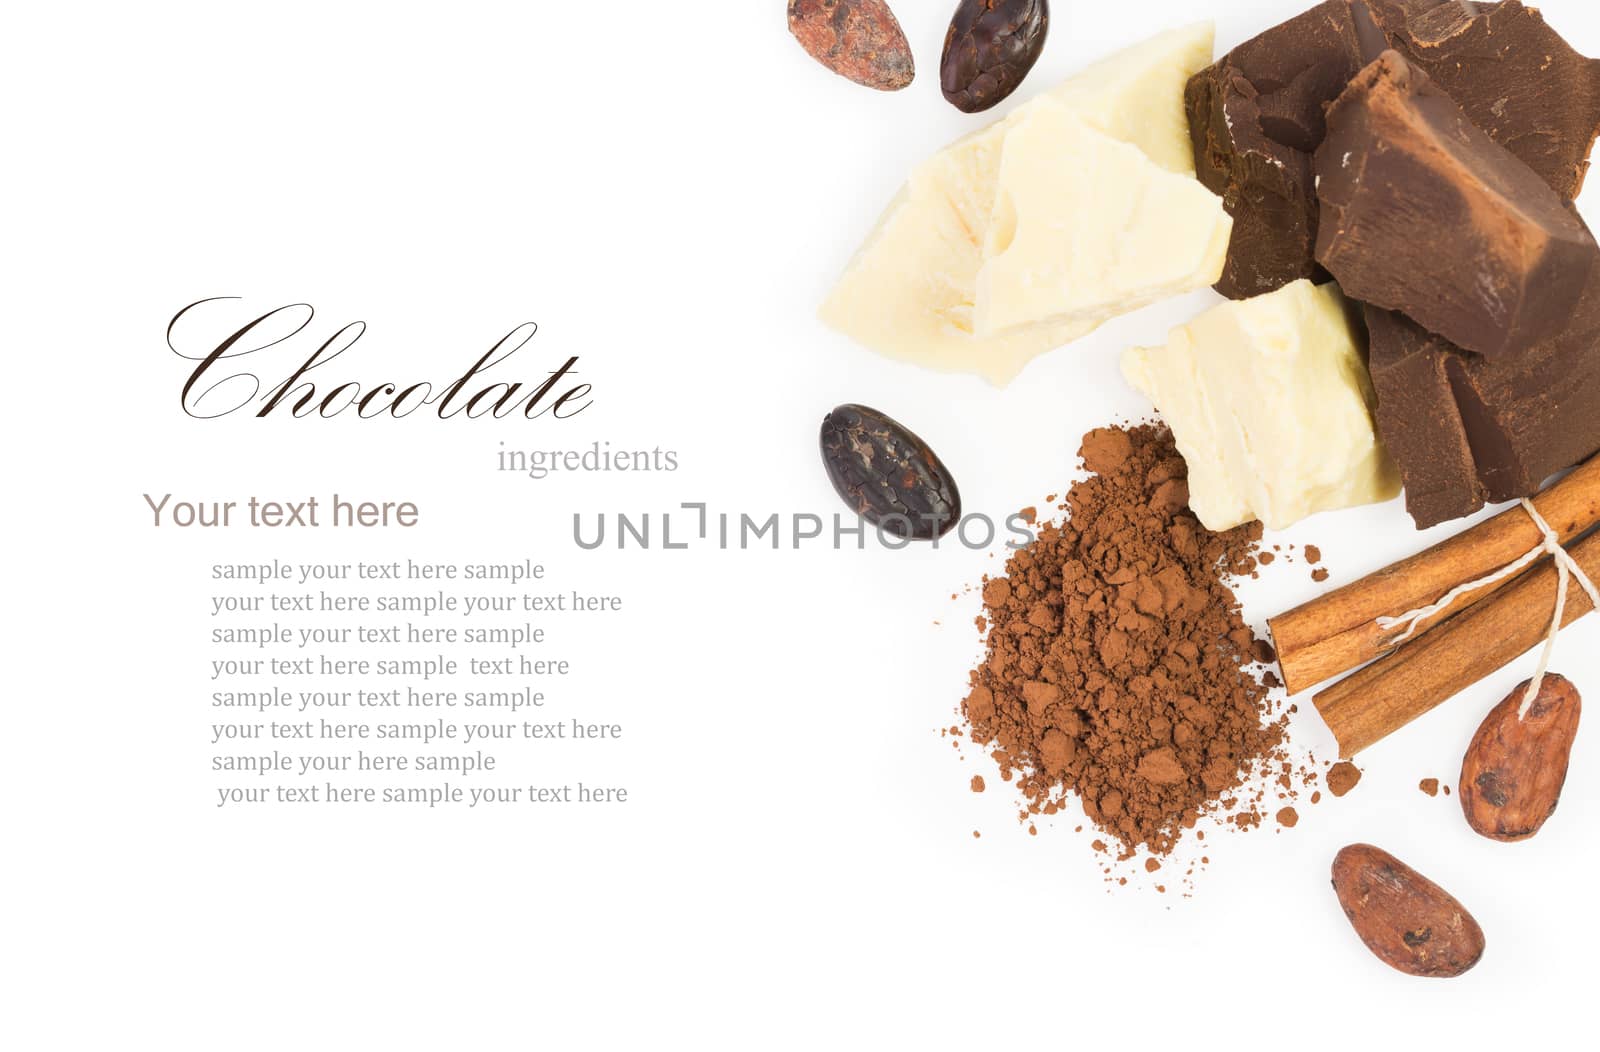 ingredients for cooking  homemade chocolate, cocoa beans, cocoa powder, cocoa butter, unsweetened block chocolate, baking chocolate, cinnamon  isolated on white background